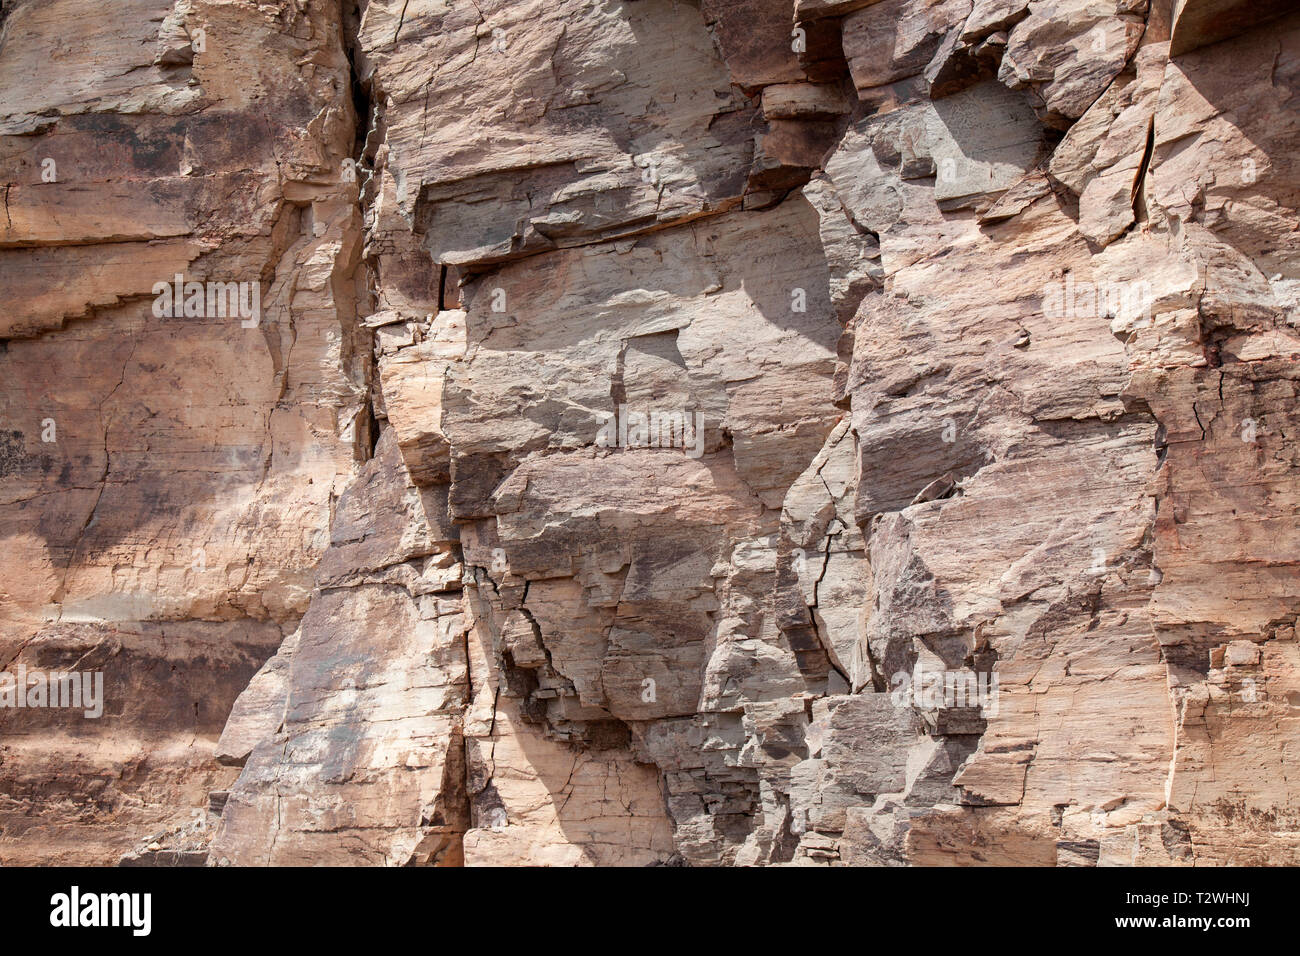 Flat Rock Surface Image & Photo (Free Trial)